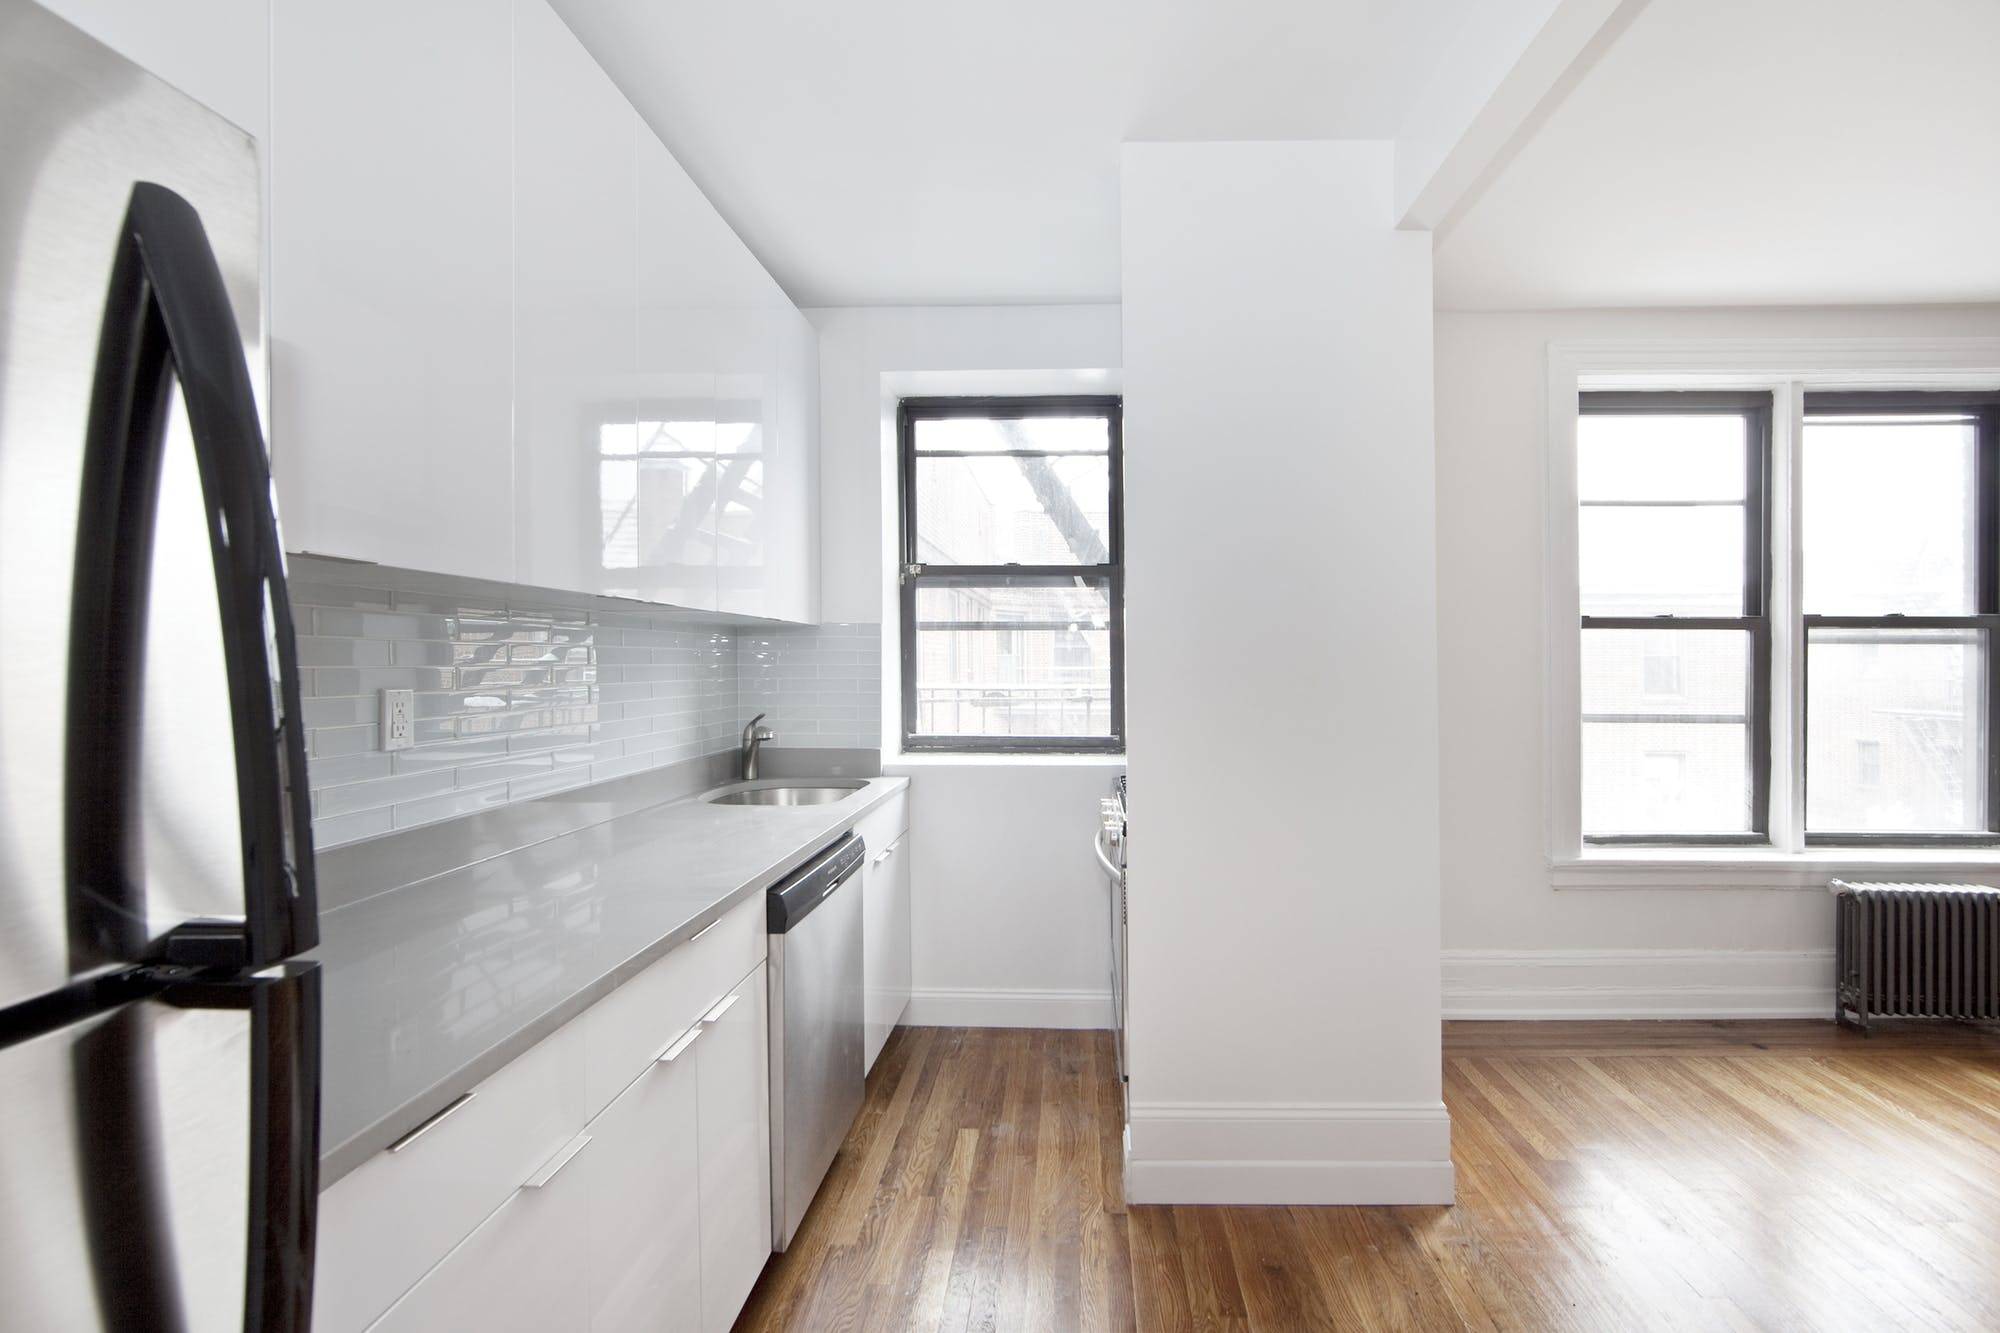 Fully renovated apartment in Historic District of Jackson Heights.